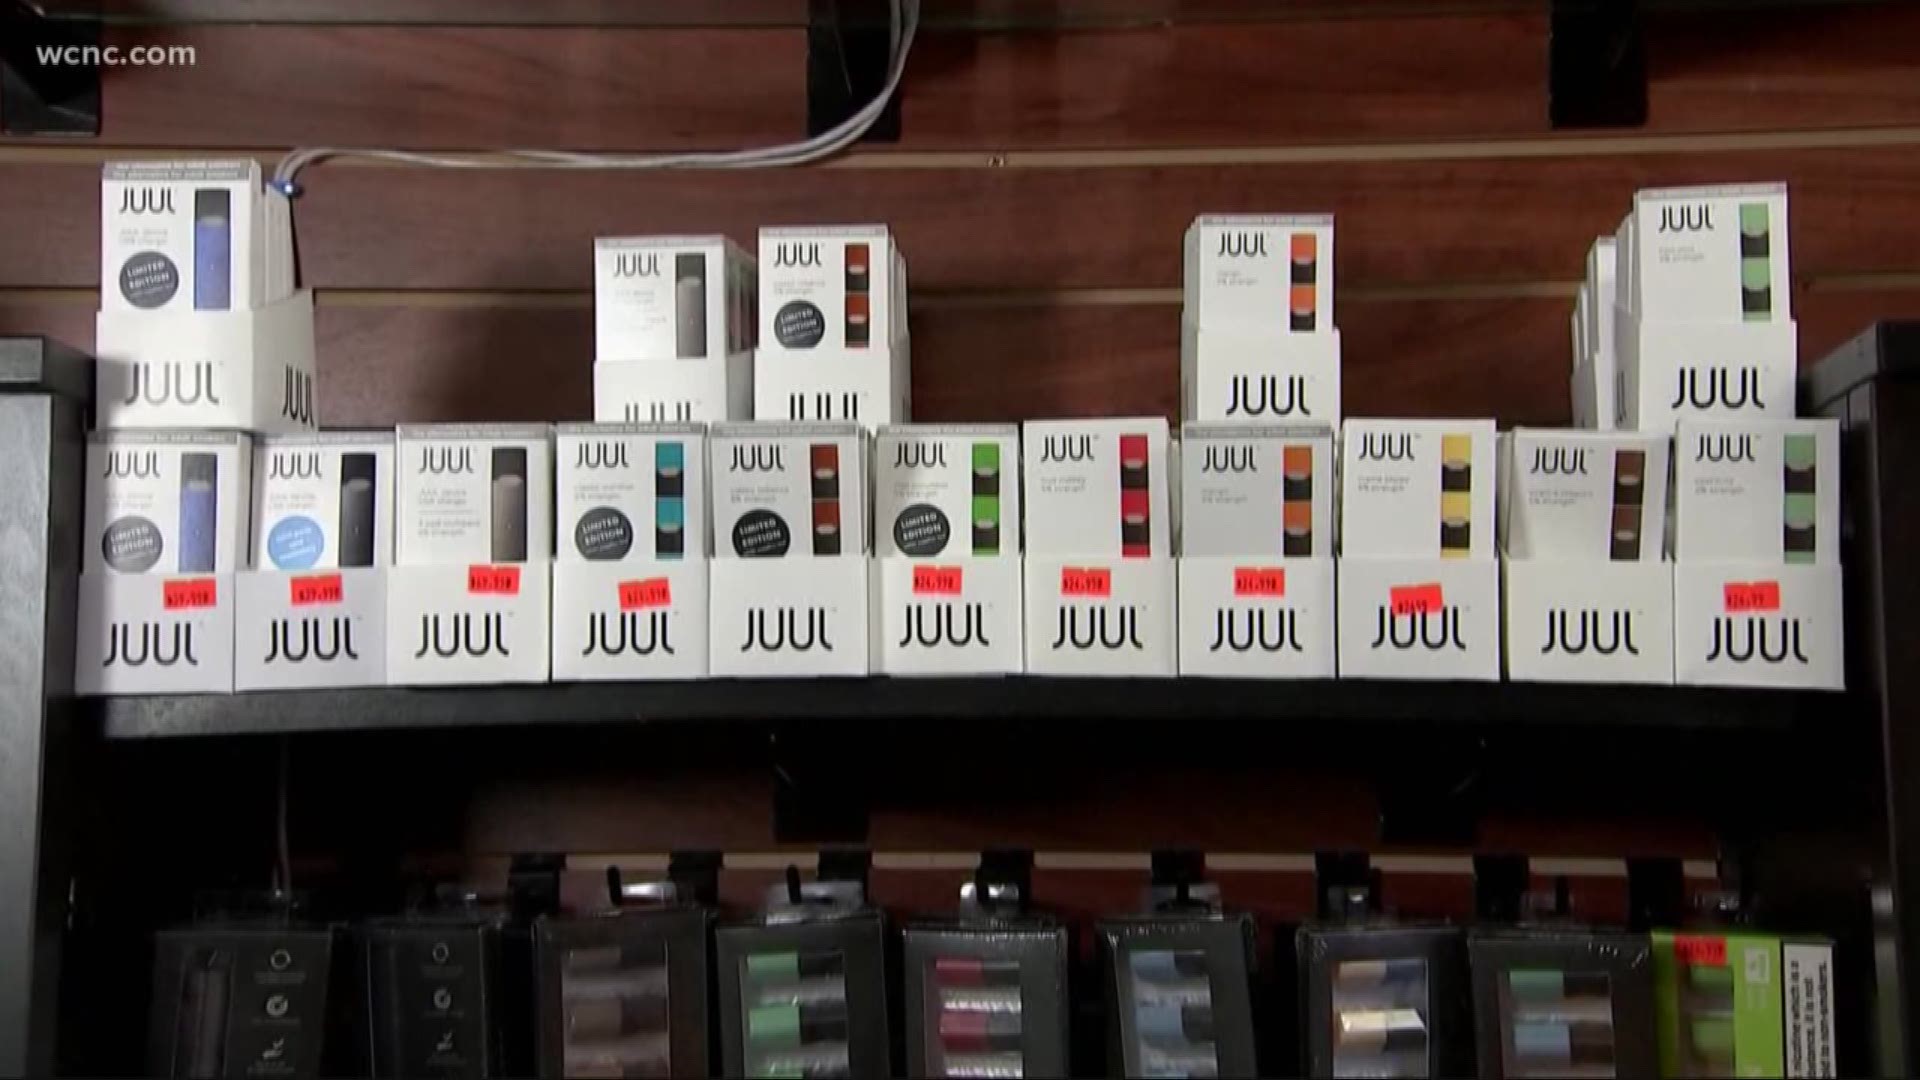 North Carolina Attorney General Josh Stein is taking on e-cigarette giant JUUL. He's filing a lawsuit against the company, making the state the first to take on the vaping industry head-on.